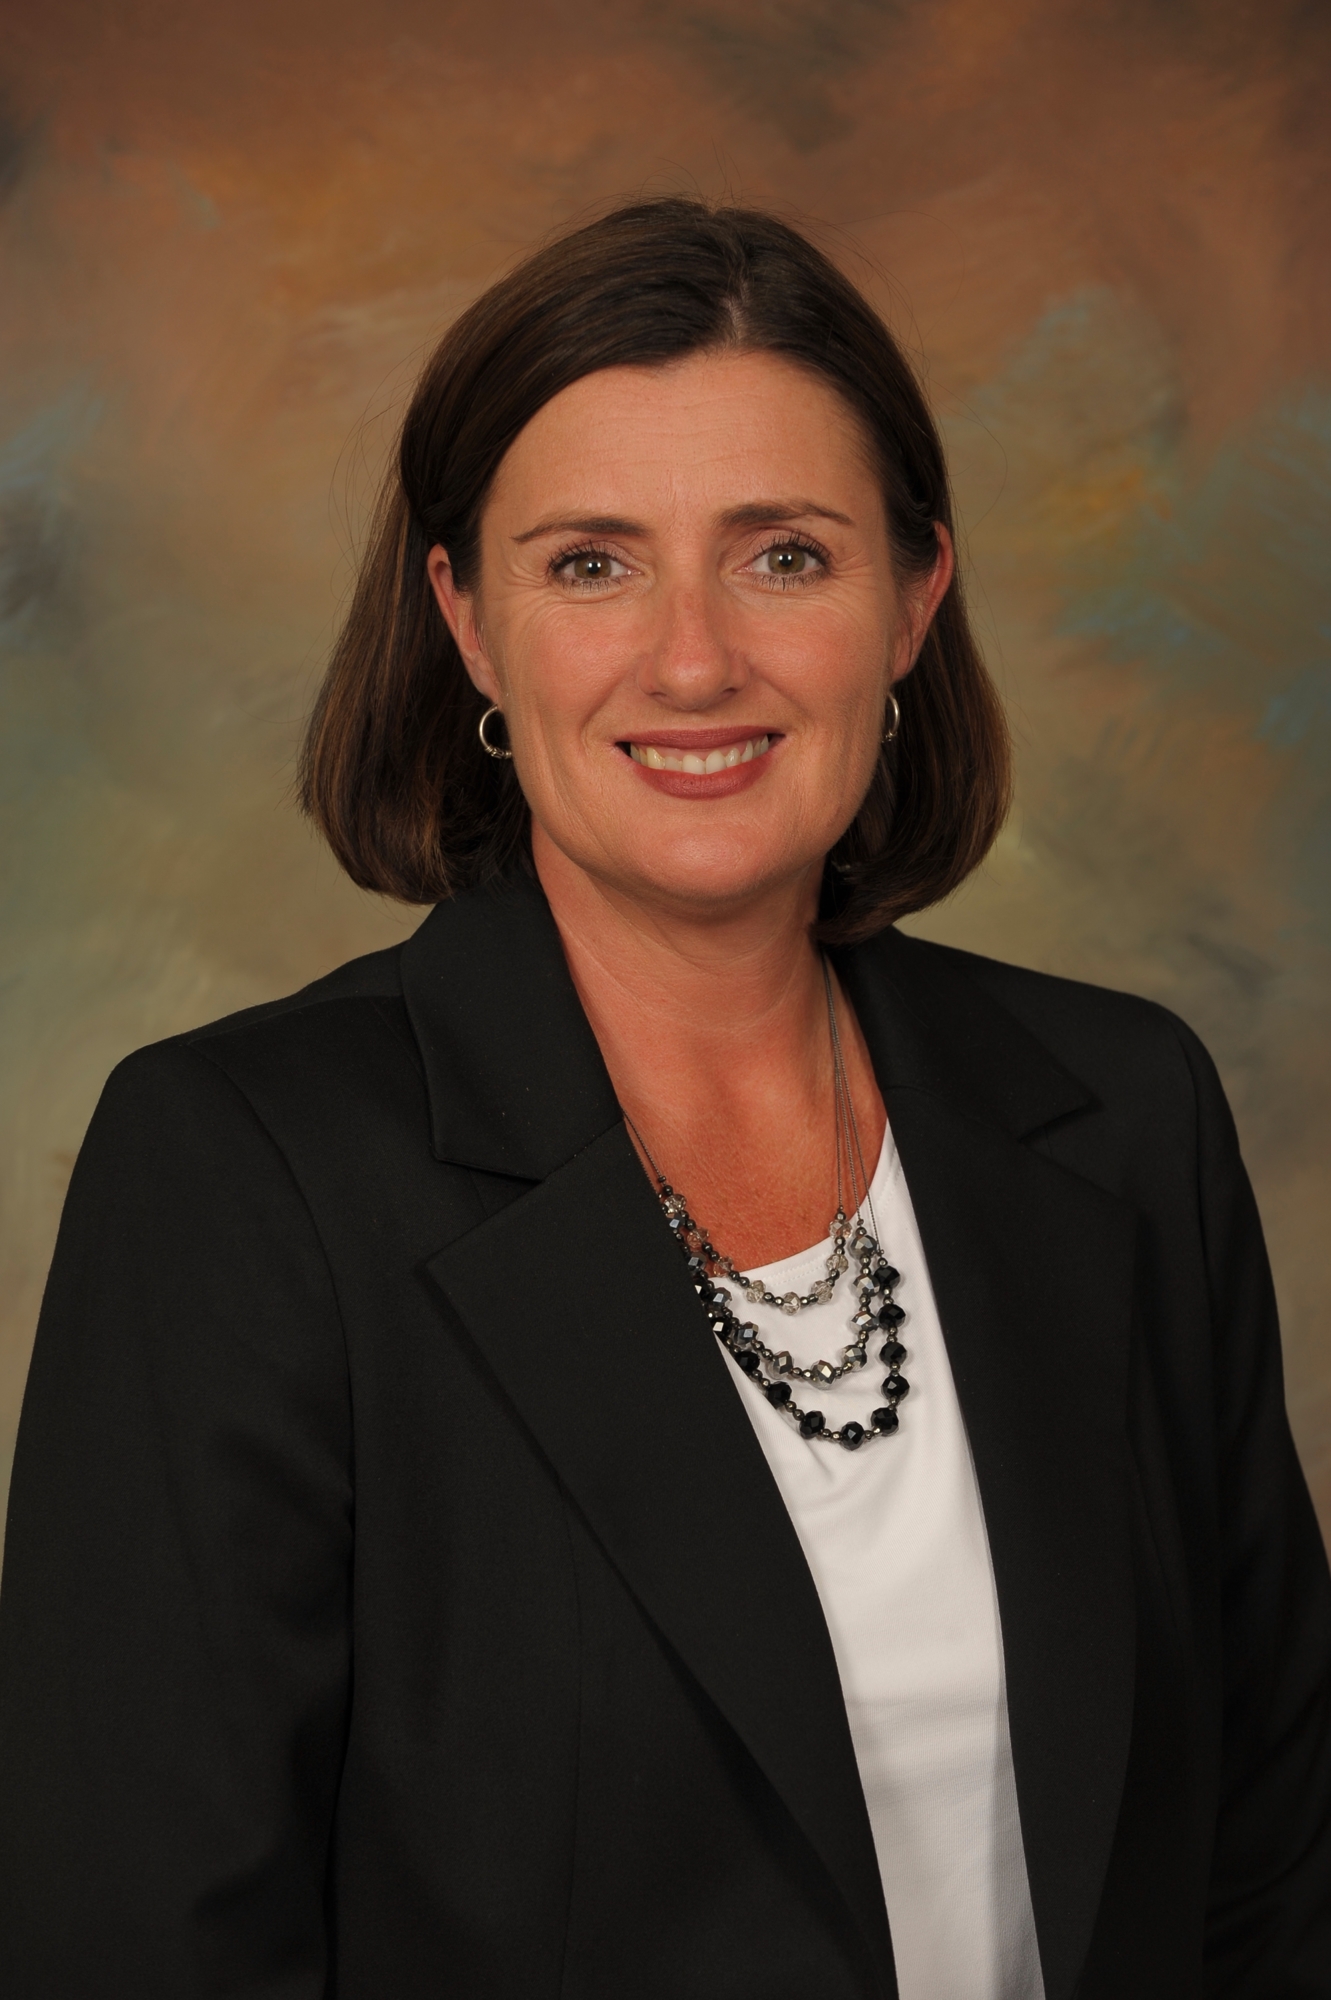 COURTESY PHOTO — Lorraine Parker has been named Chief Nursing Officer at Bayfront Health St. Petersburg.